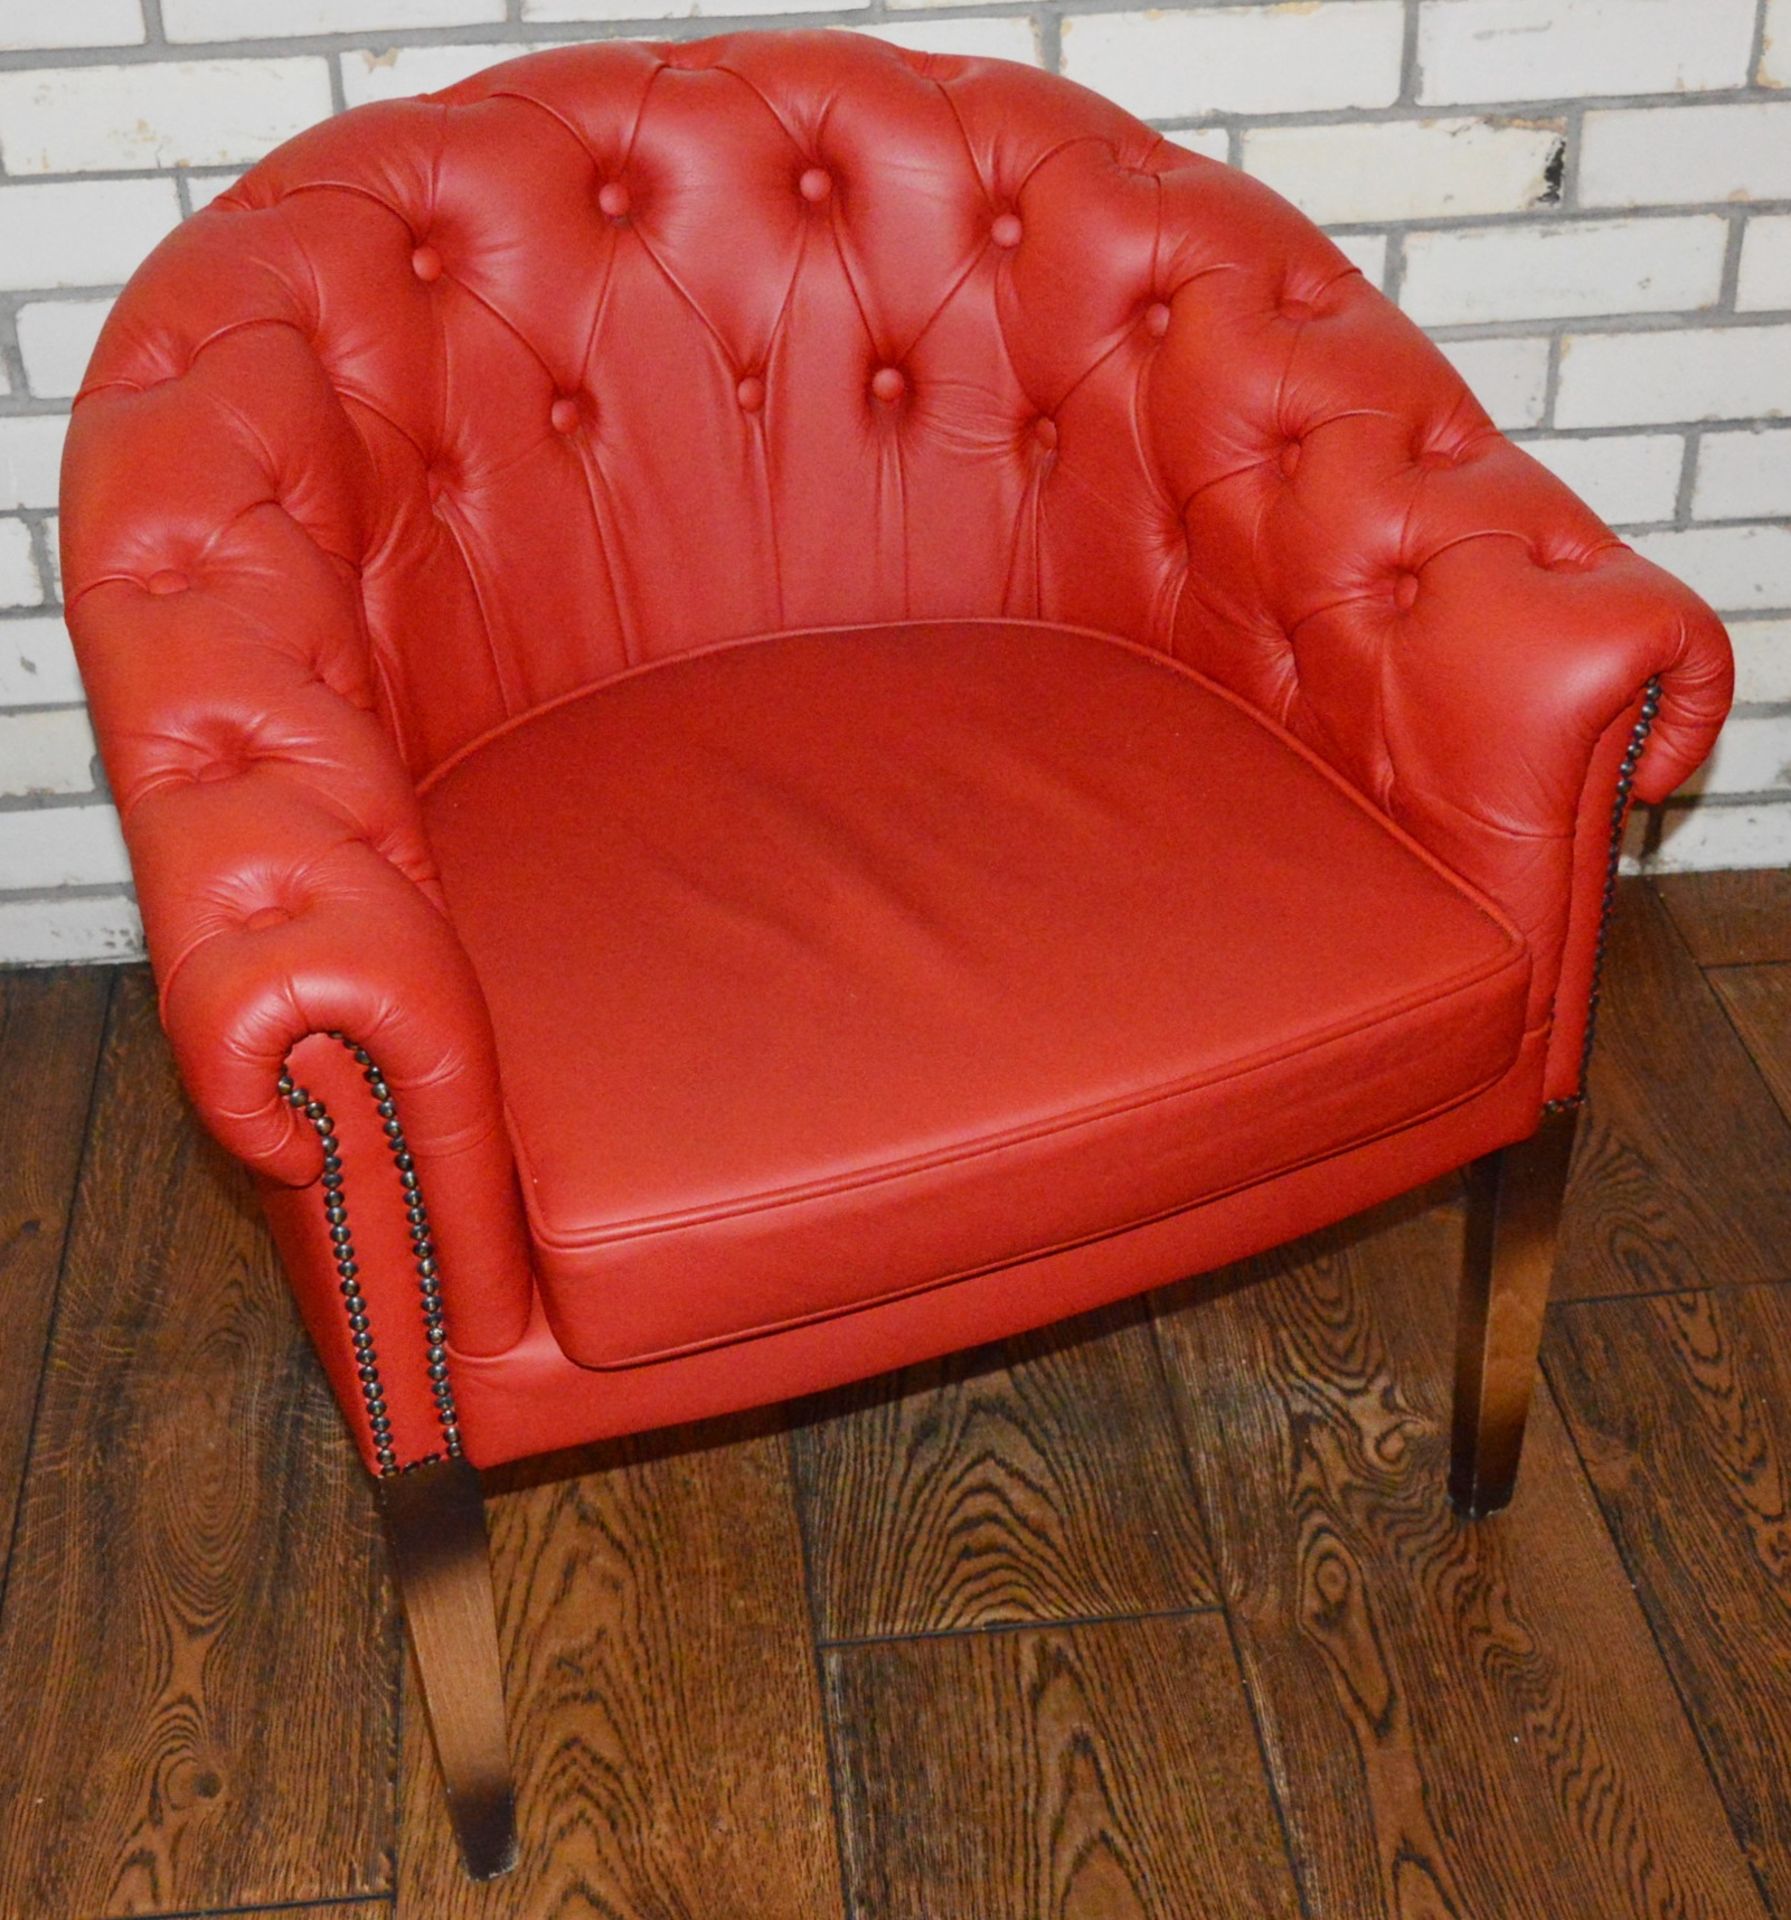 4 x Chesterfield Style Buttoned Back Red Leather Tub Chairs With Hardwood Legs Finished in an - Image 5 of 8